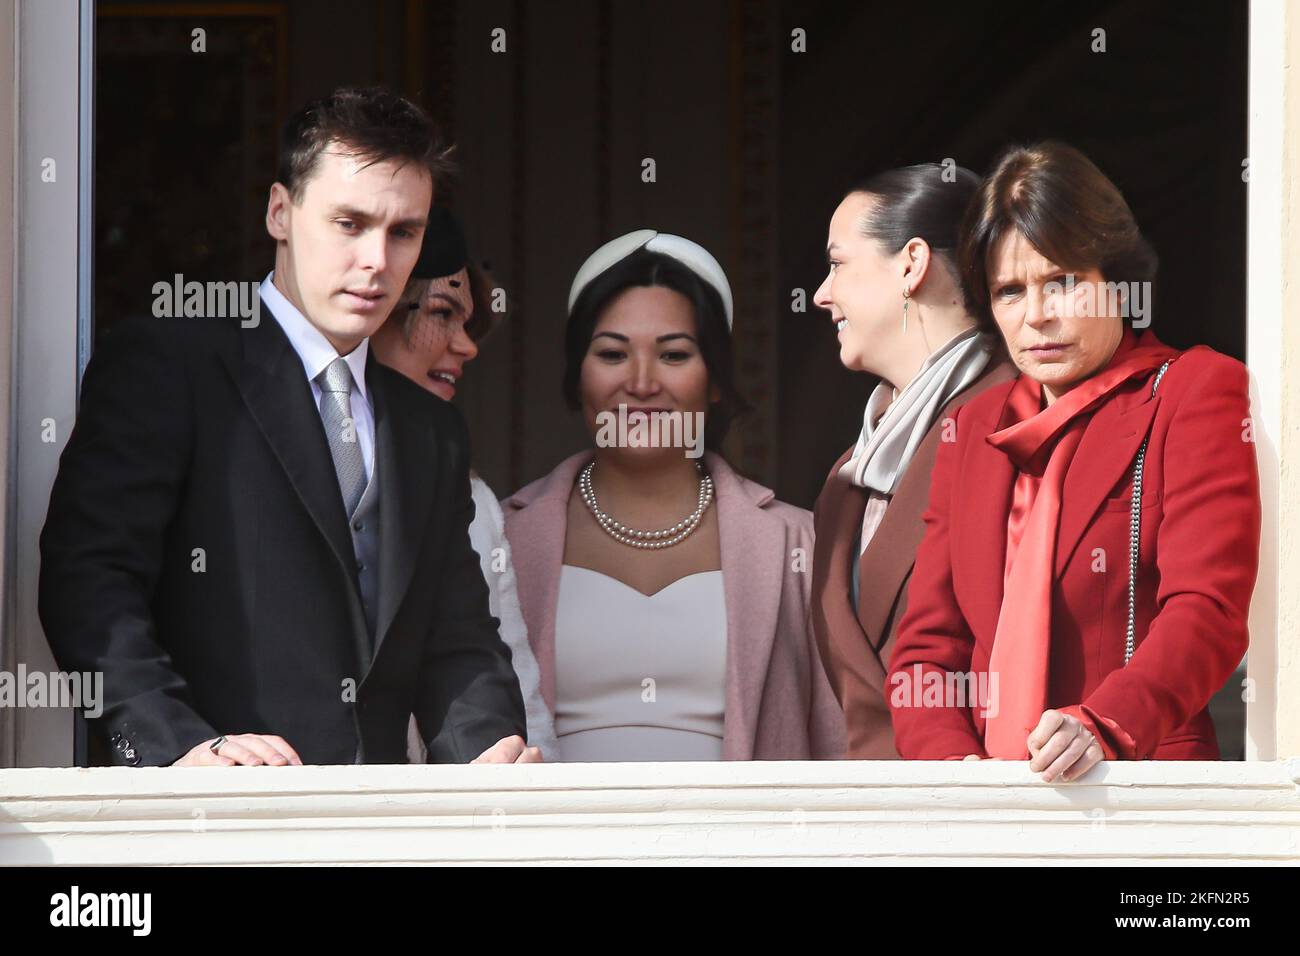 Louis Ducruet, Camille Gottlieb, Pauline Ducruet, Marie Chevalier, Princess Stephanie of Monaco are attending the parade at the palace balcony during the celebration for the National Day on November 19, 2022 in Monaco Ville, Principality of Monaco. Photo by Marco Piovanotto/IPA - NO TABLOIDS Stock Photo